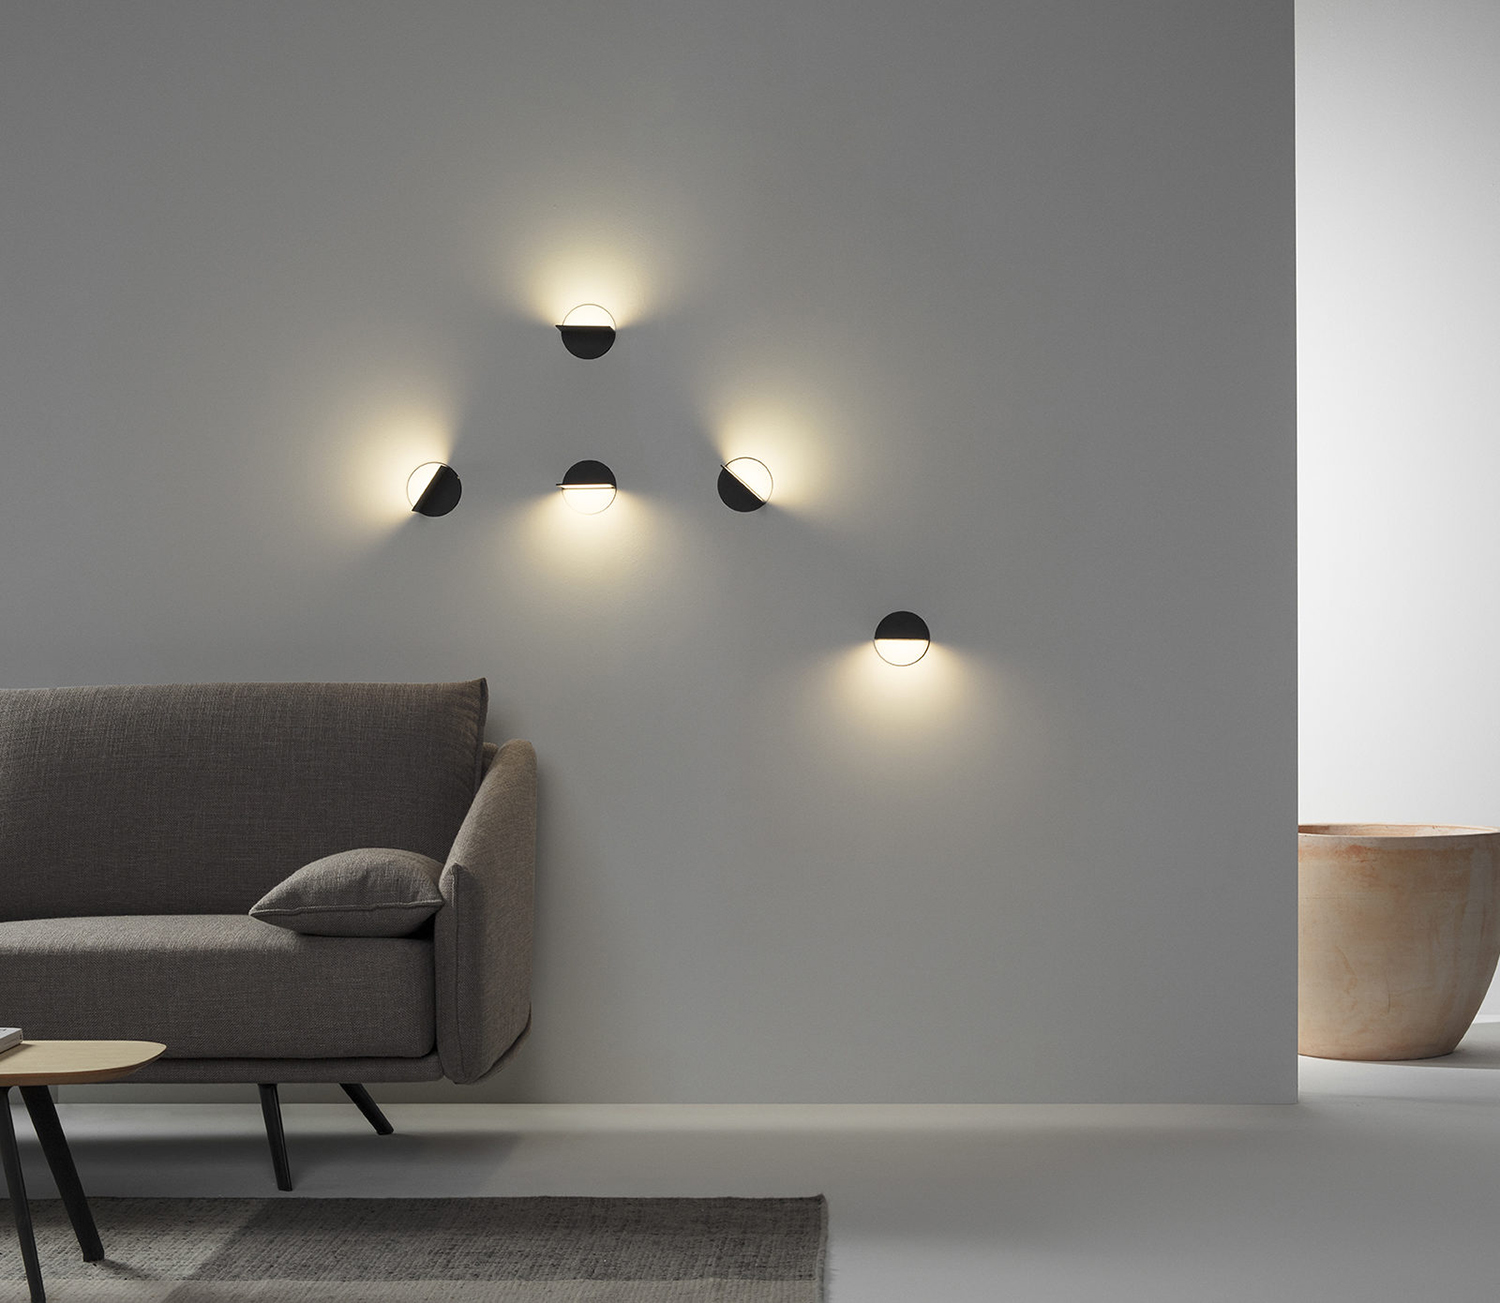 Art direction by Spanish studio Folch for Fluvia, a range of adaptable lighting solutions from LED Simon